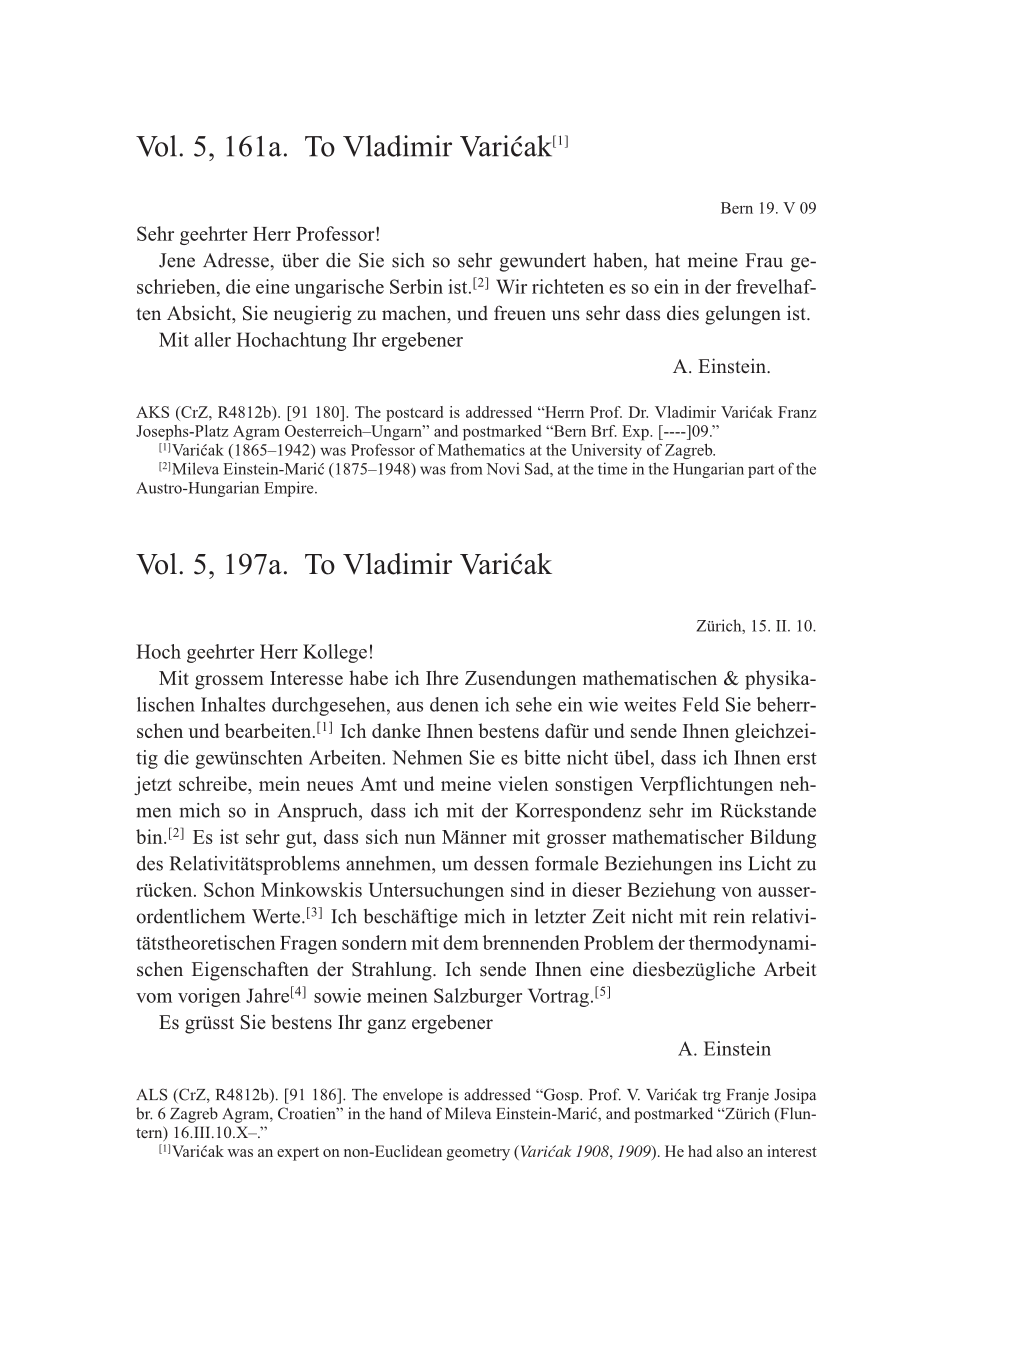 Volume 10: The Berlin Years: Correspondence May-December 1920 / Supplementary Correspondence 1909-1920 page 5